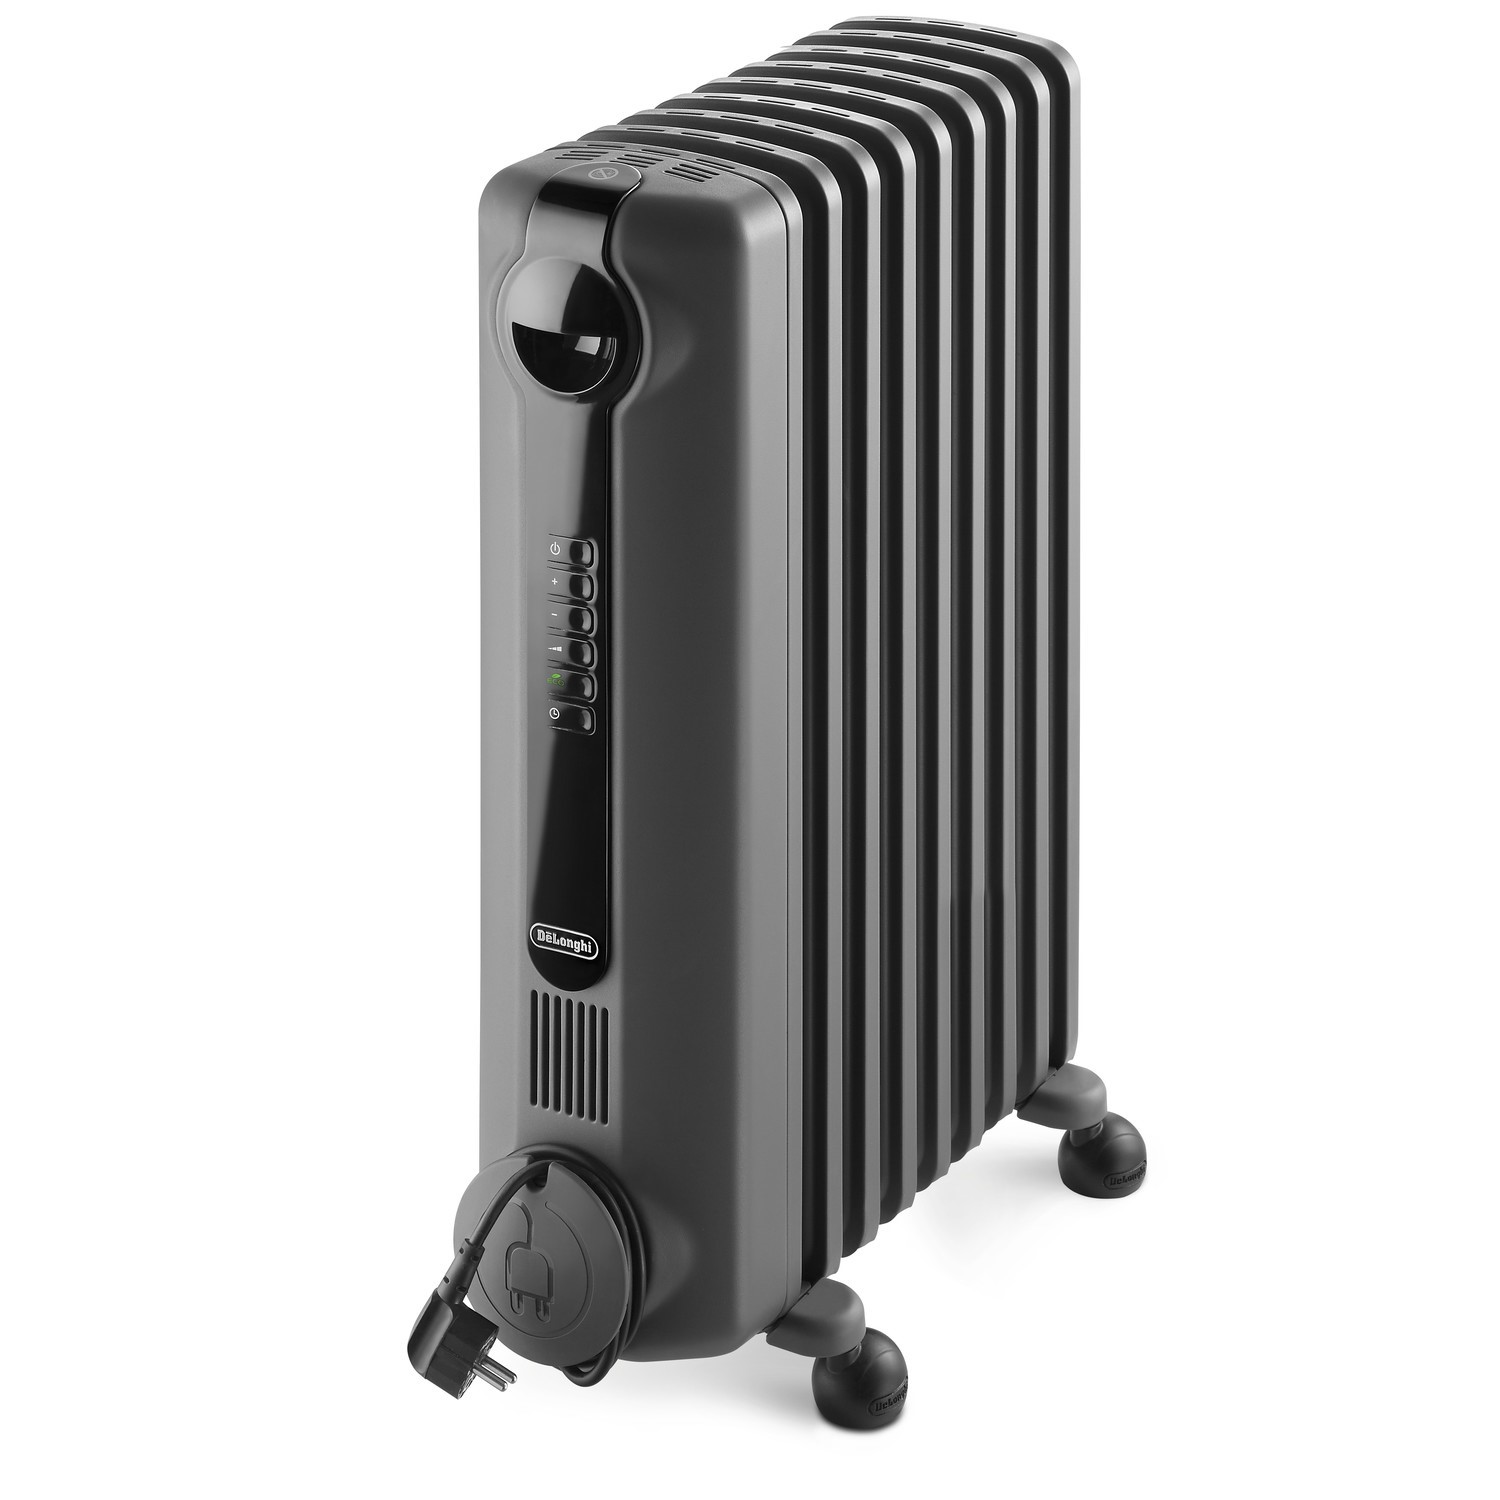 DeLonghi Radia-S 2.0kW Oil Filled Radiator with Thermostat Grey 3 years warranty TRRS0920E.G